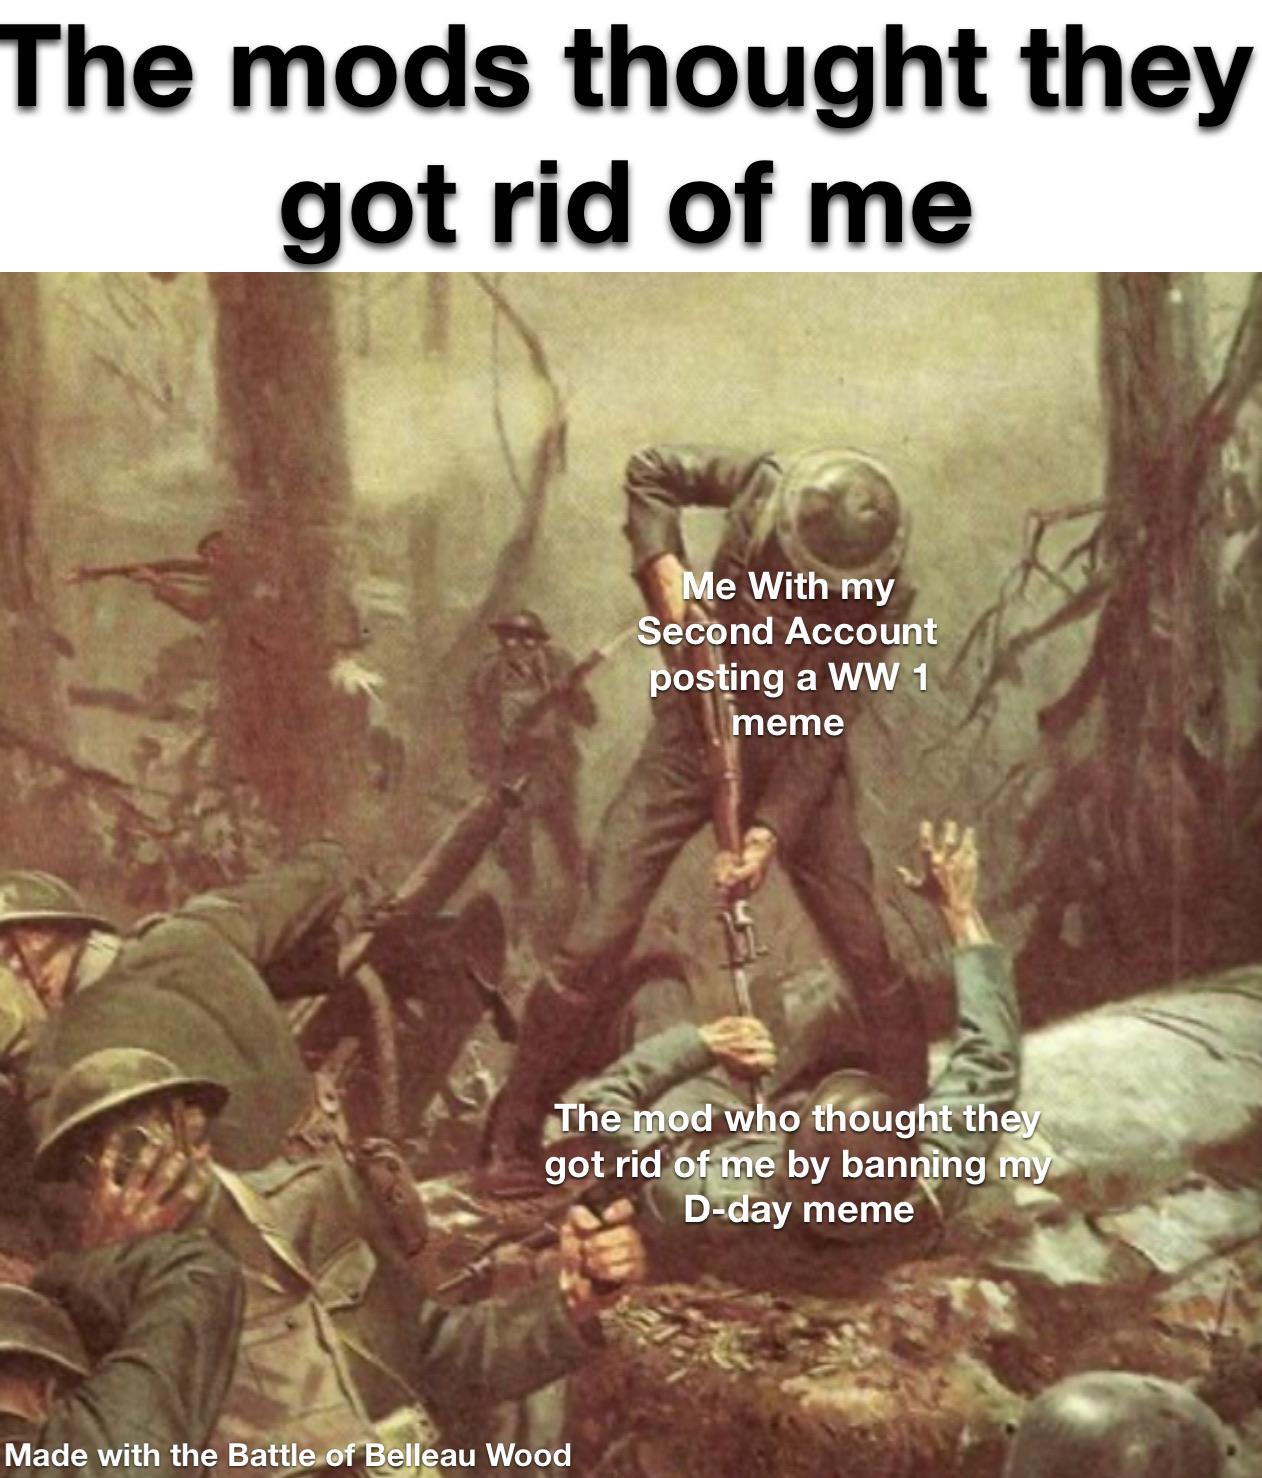 History, Day, WW2, VPN, Reddit, Marines History Memes History, Day, WW2, VPN, Reddit, Marines text: The mods thought they got rid of me e With my e&ond Account bosiing a WW 1 eme ._he odw o tfi6ughffh